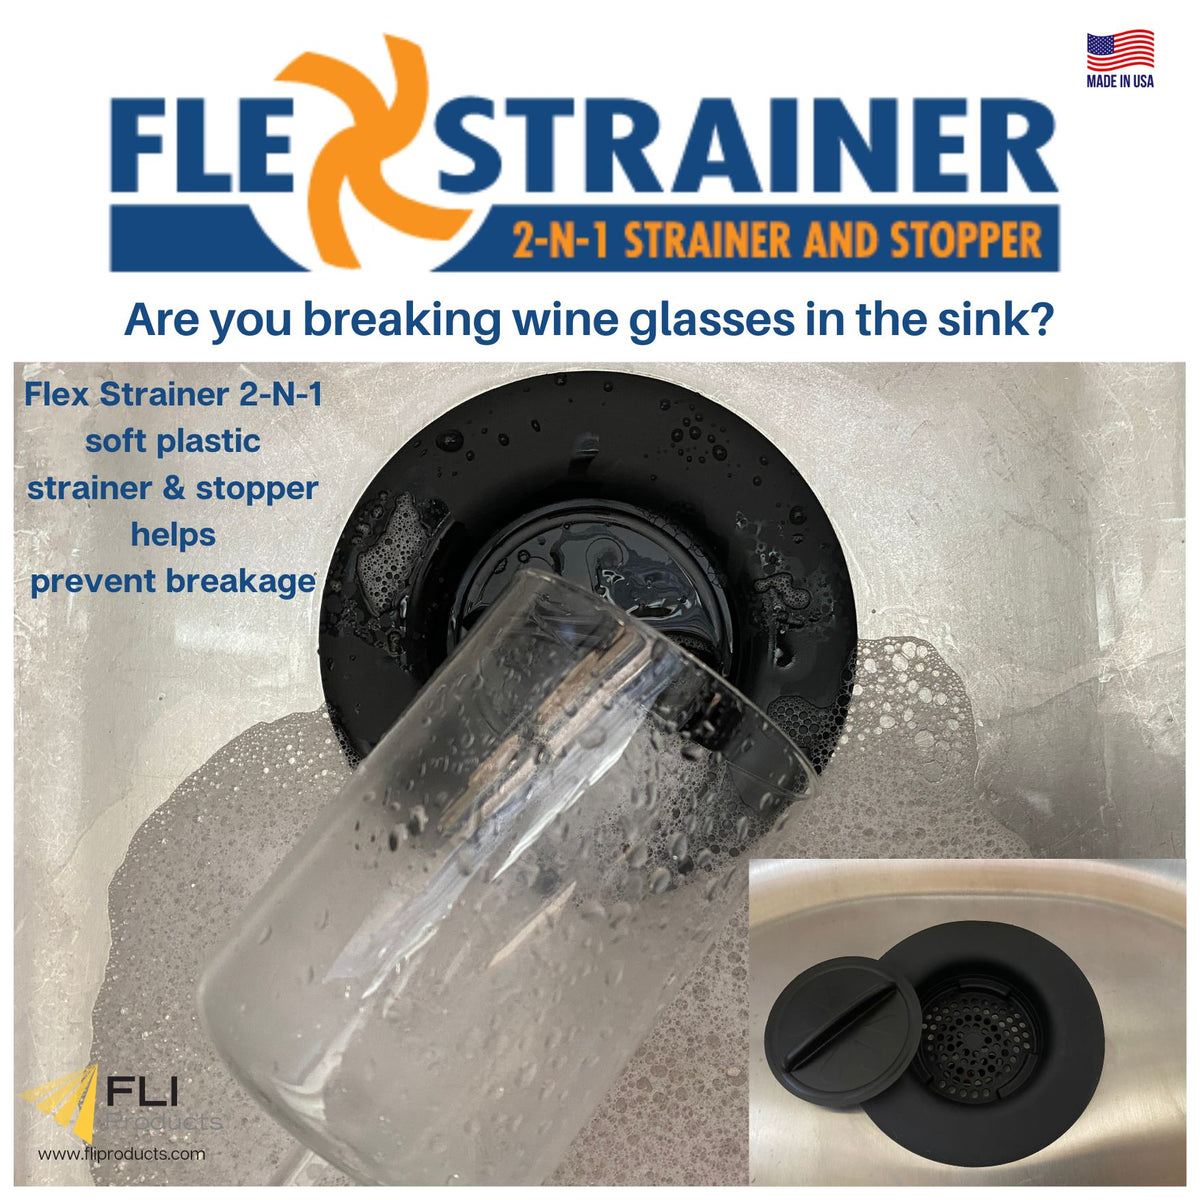 Fli Products Flex Strainer DPFS1010-2 Kitchen Sink Strainer and Drain Plug Stopper All in One, Fits All 3-1/2” Drains and Disposals, 5-1/4” Diameter